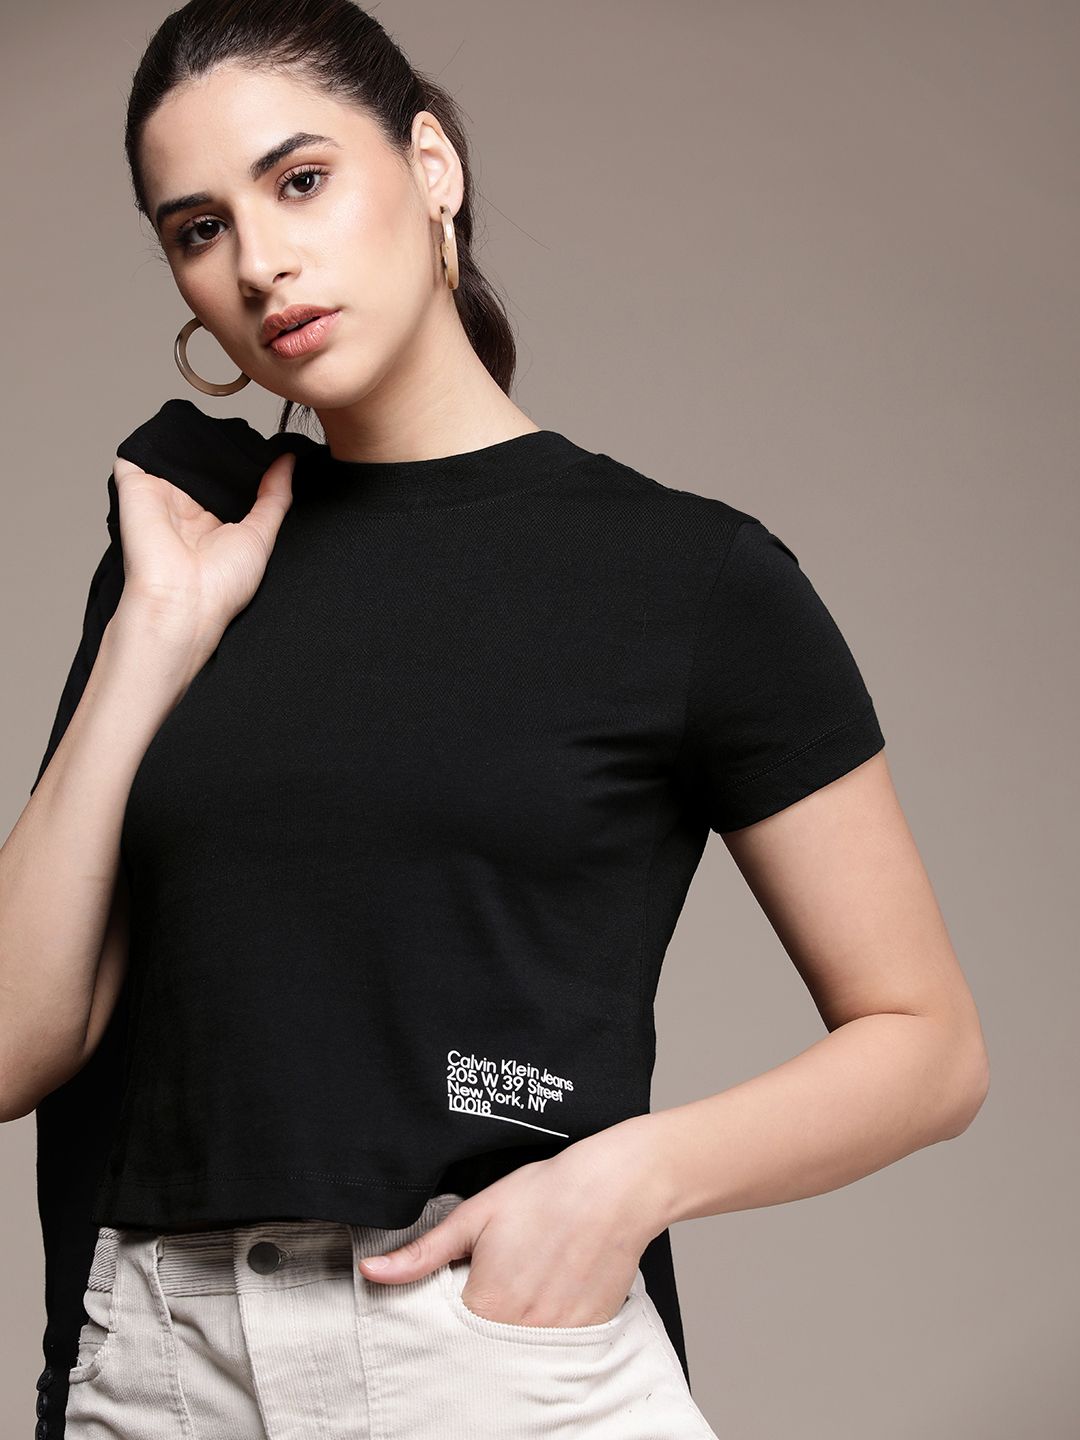 Calvin Jeans Women Printed T-shirt Price in India, Full Specifications & Offers | DTashion.com